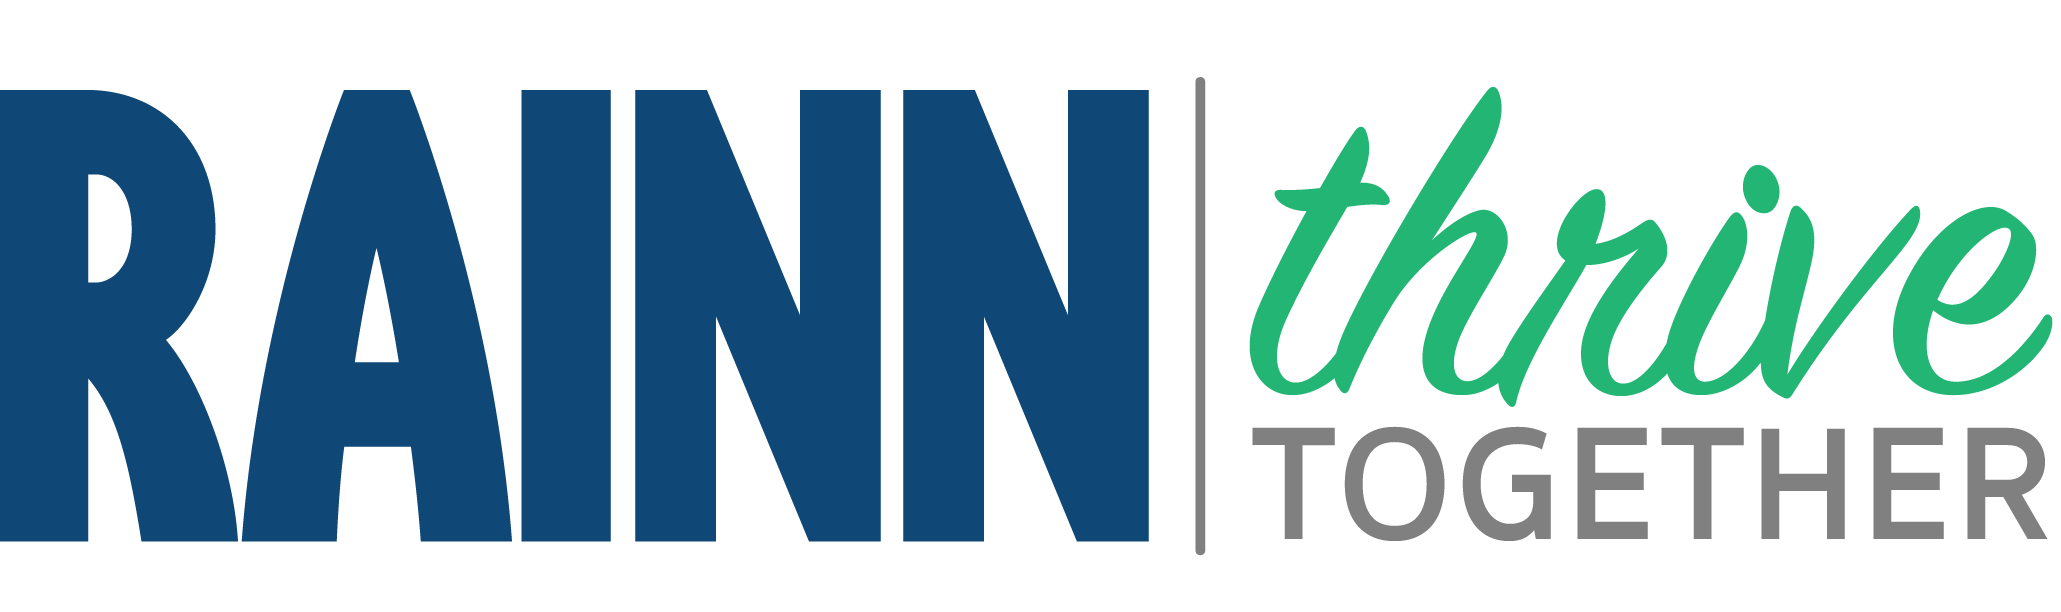 RAINN's Thrive Together Banner Features RAINN's blue text only logo, adjacent to a script-only Thrive Together logo in Green